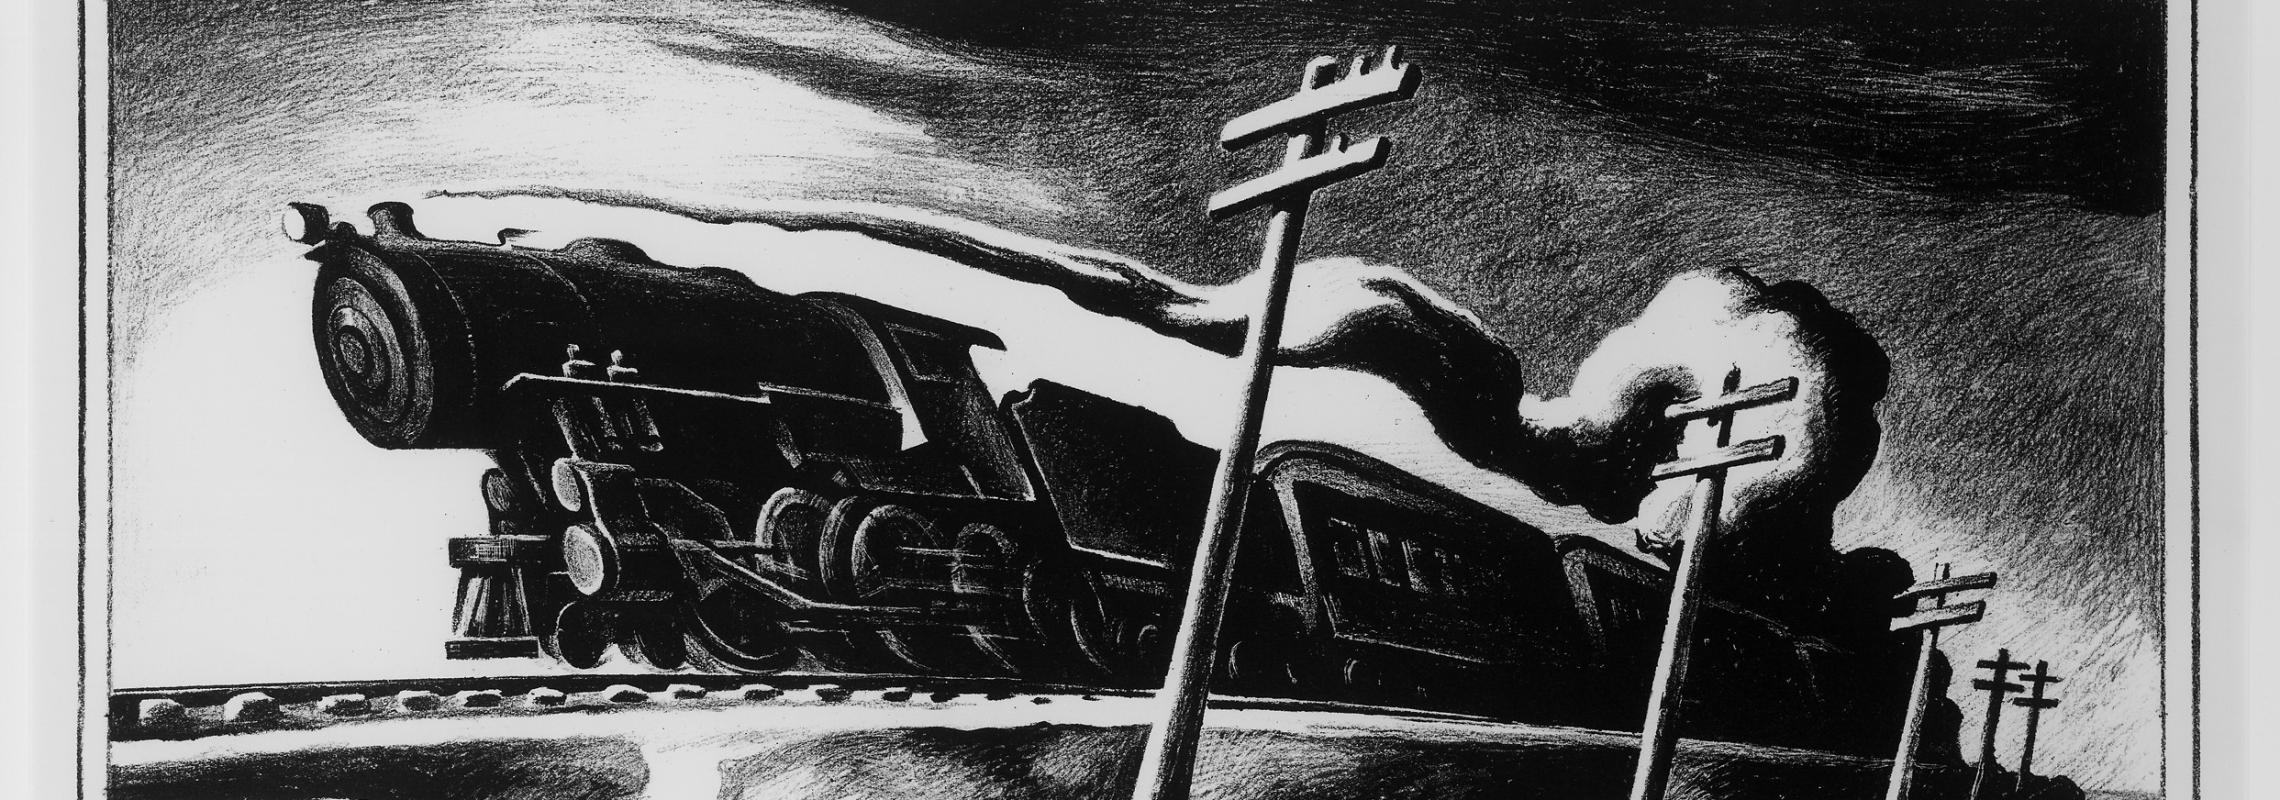 Going West, 1934, lithograph by Thomas Hart Benton